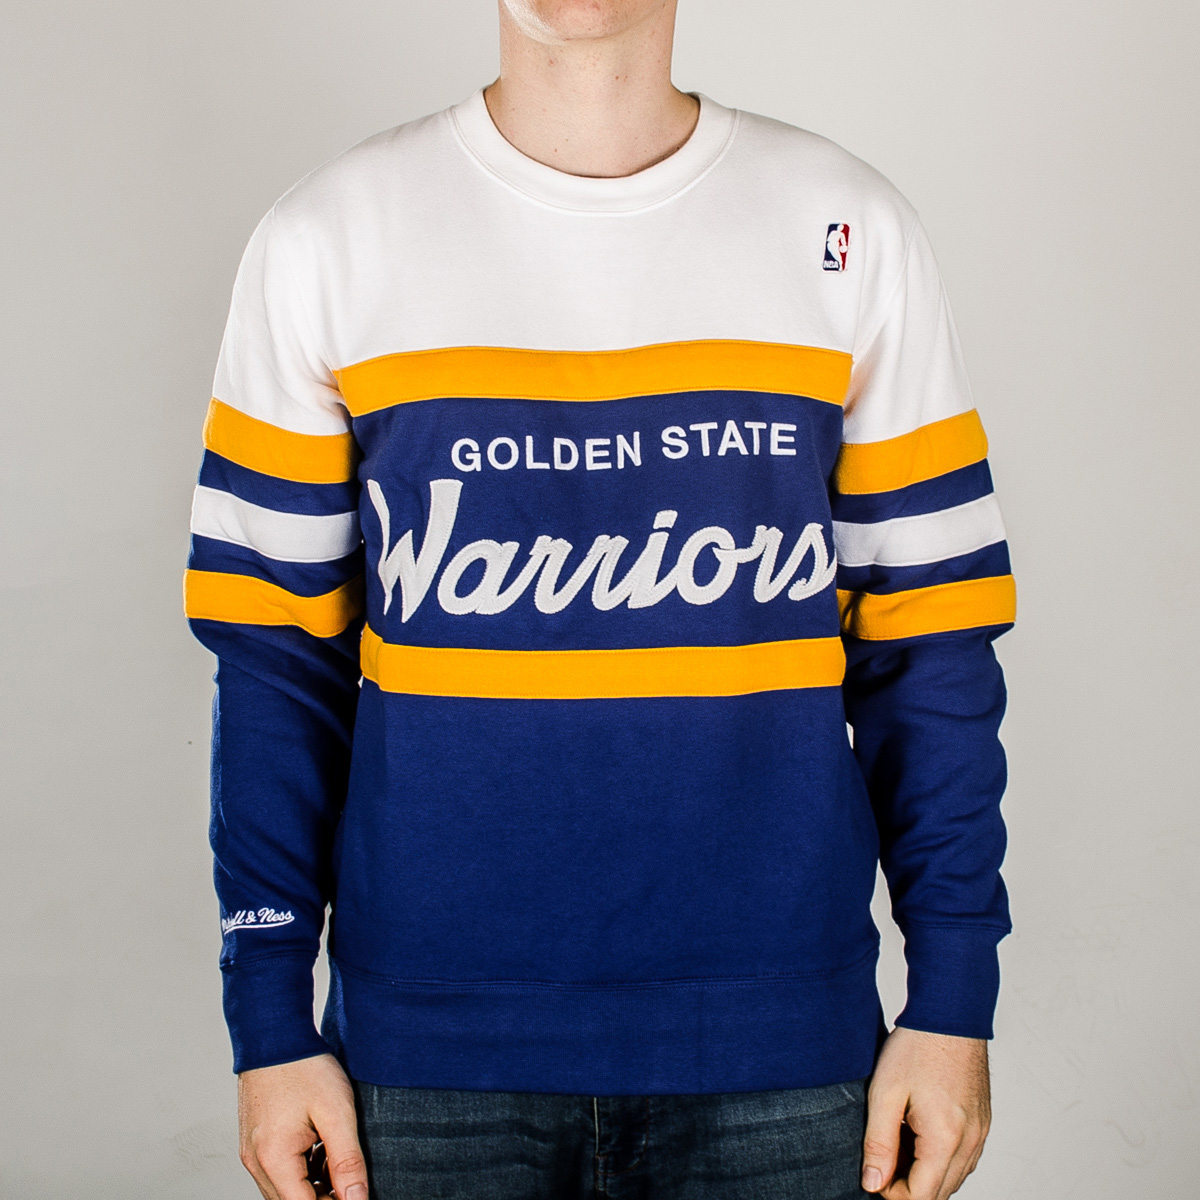 where can i buy golden state warriors merchandise